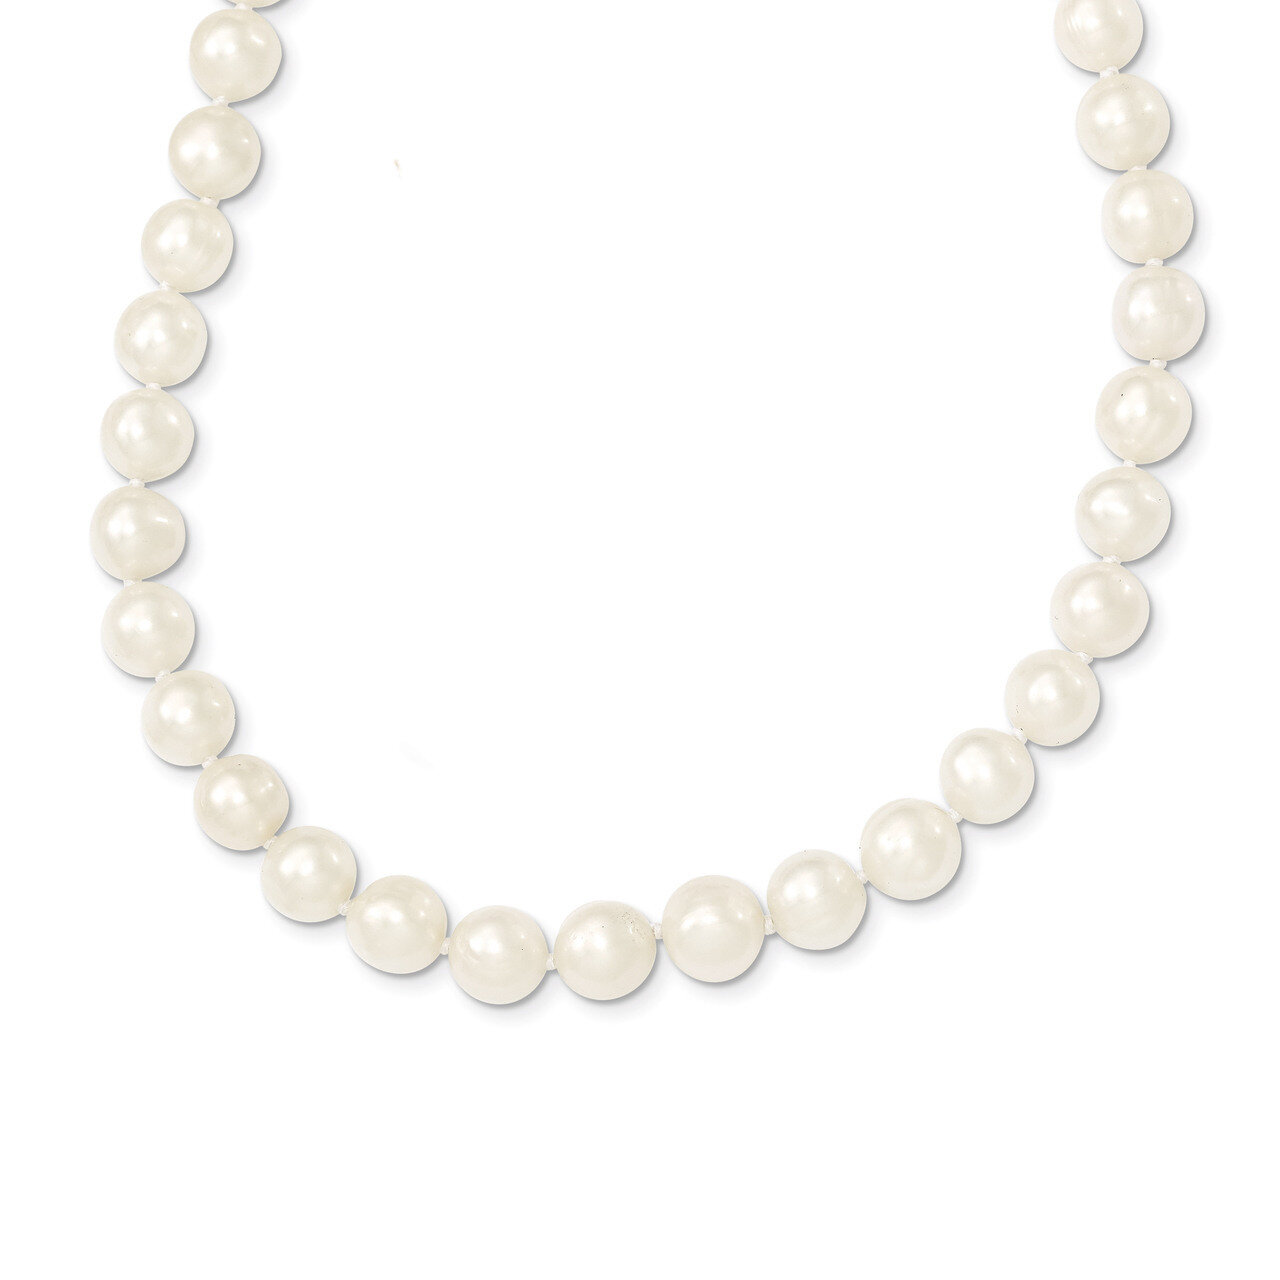 7.5-9mm Cultured Pearl Necklace 18 Inch 14k Gold PR19-18